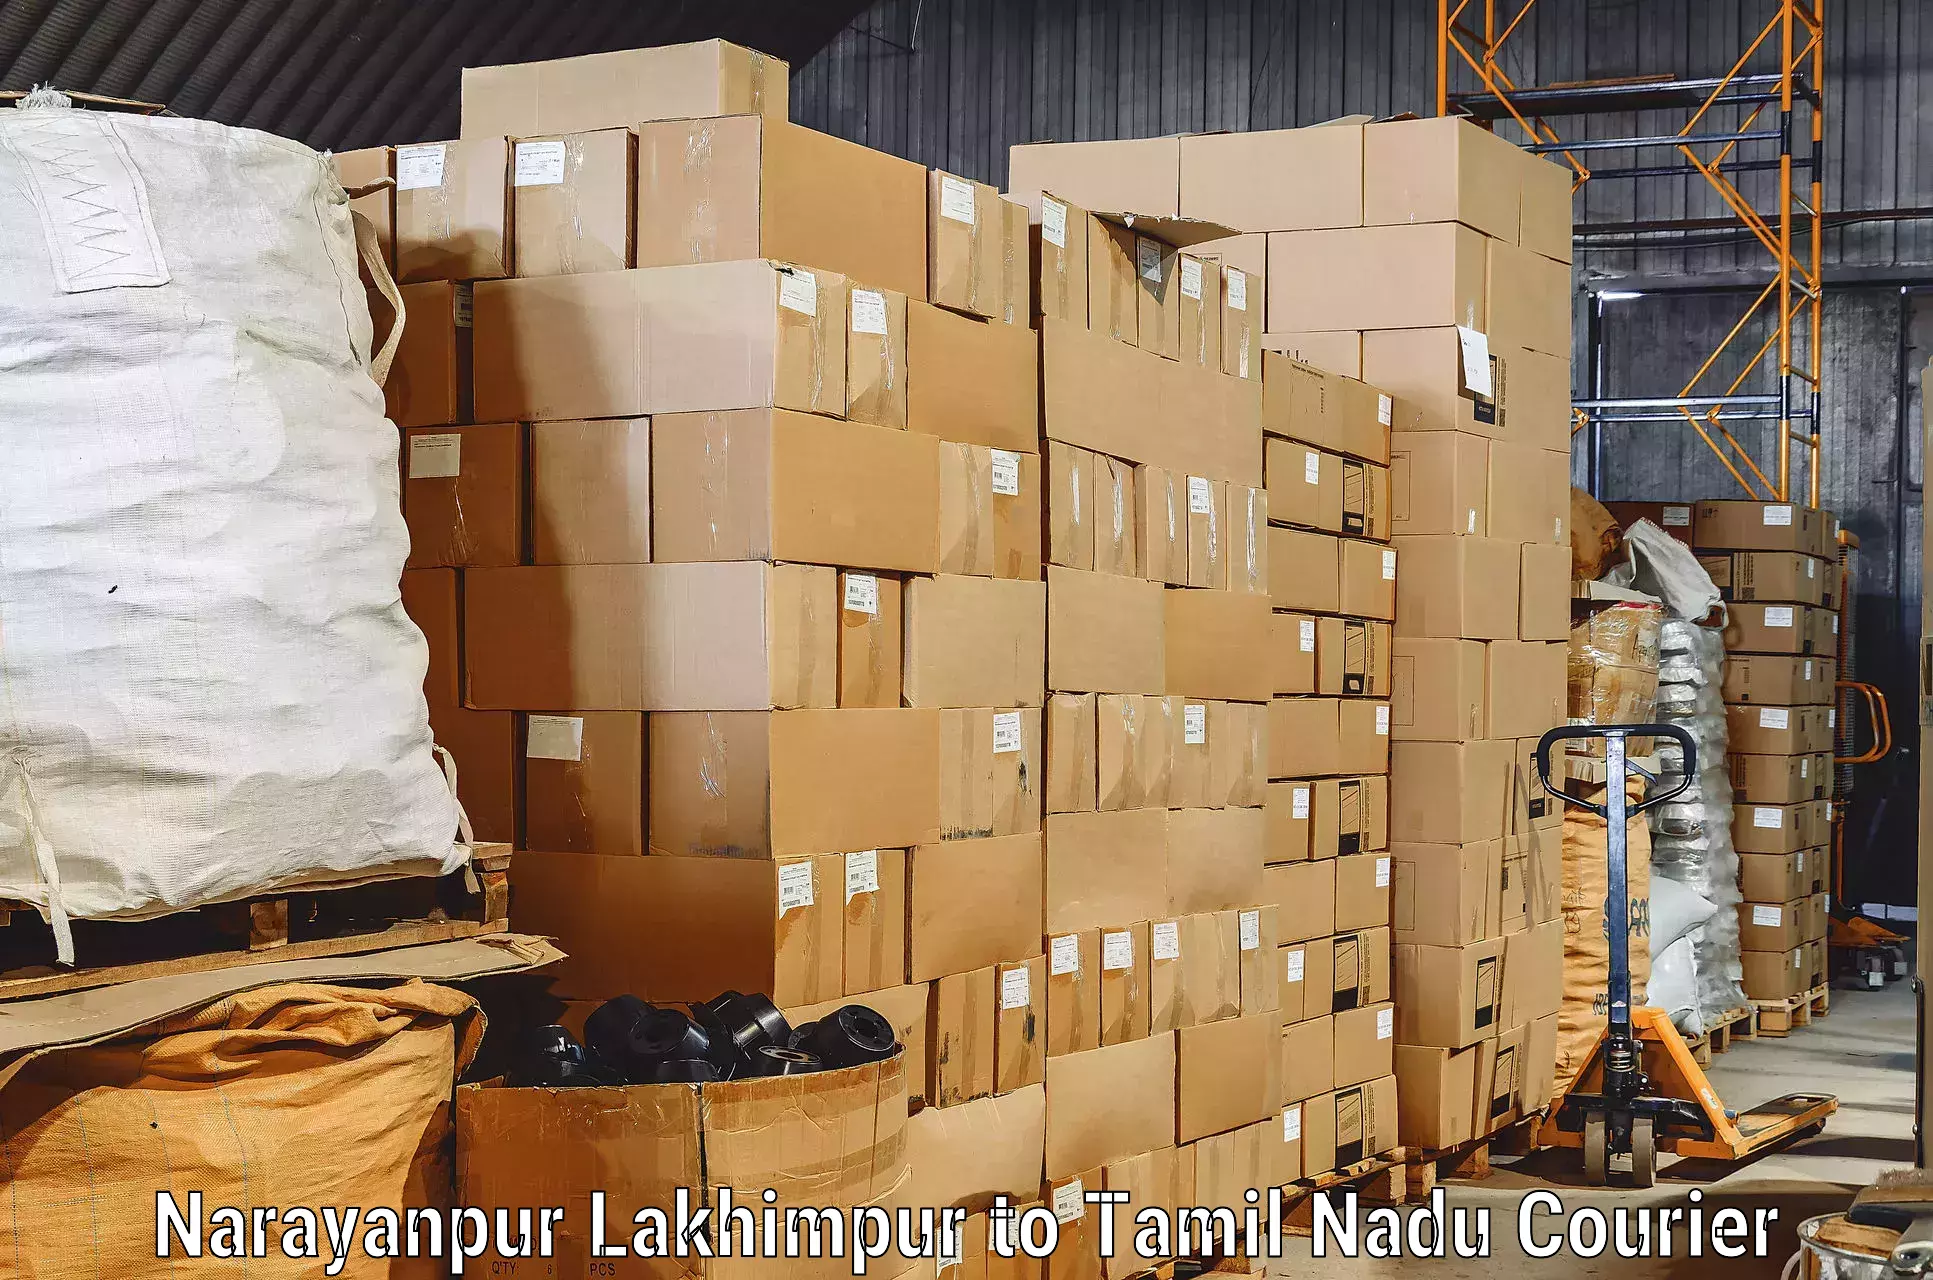 Reliable relocation services Narayanpur Lakhimpur to Ottapidaram